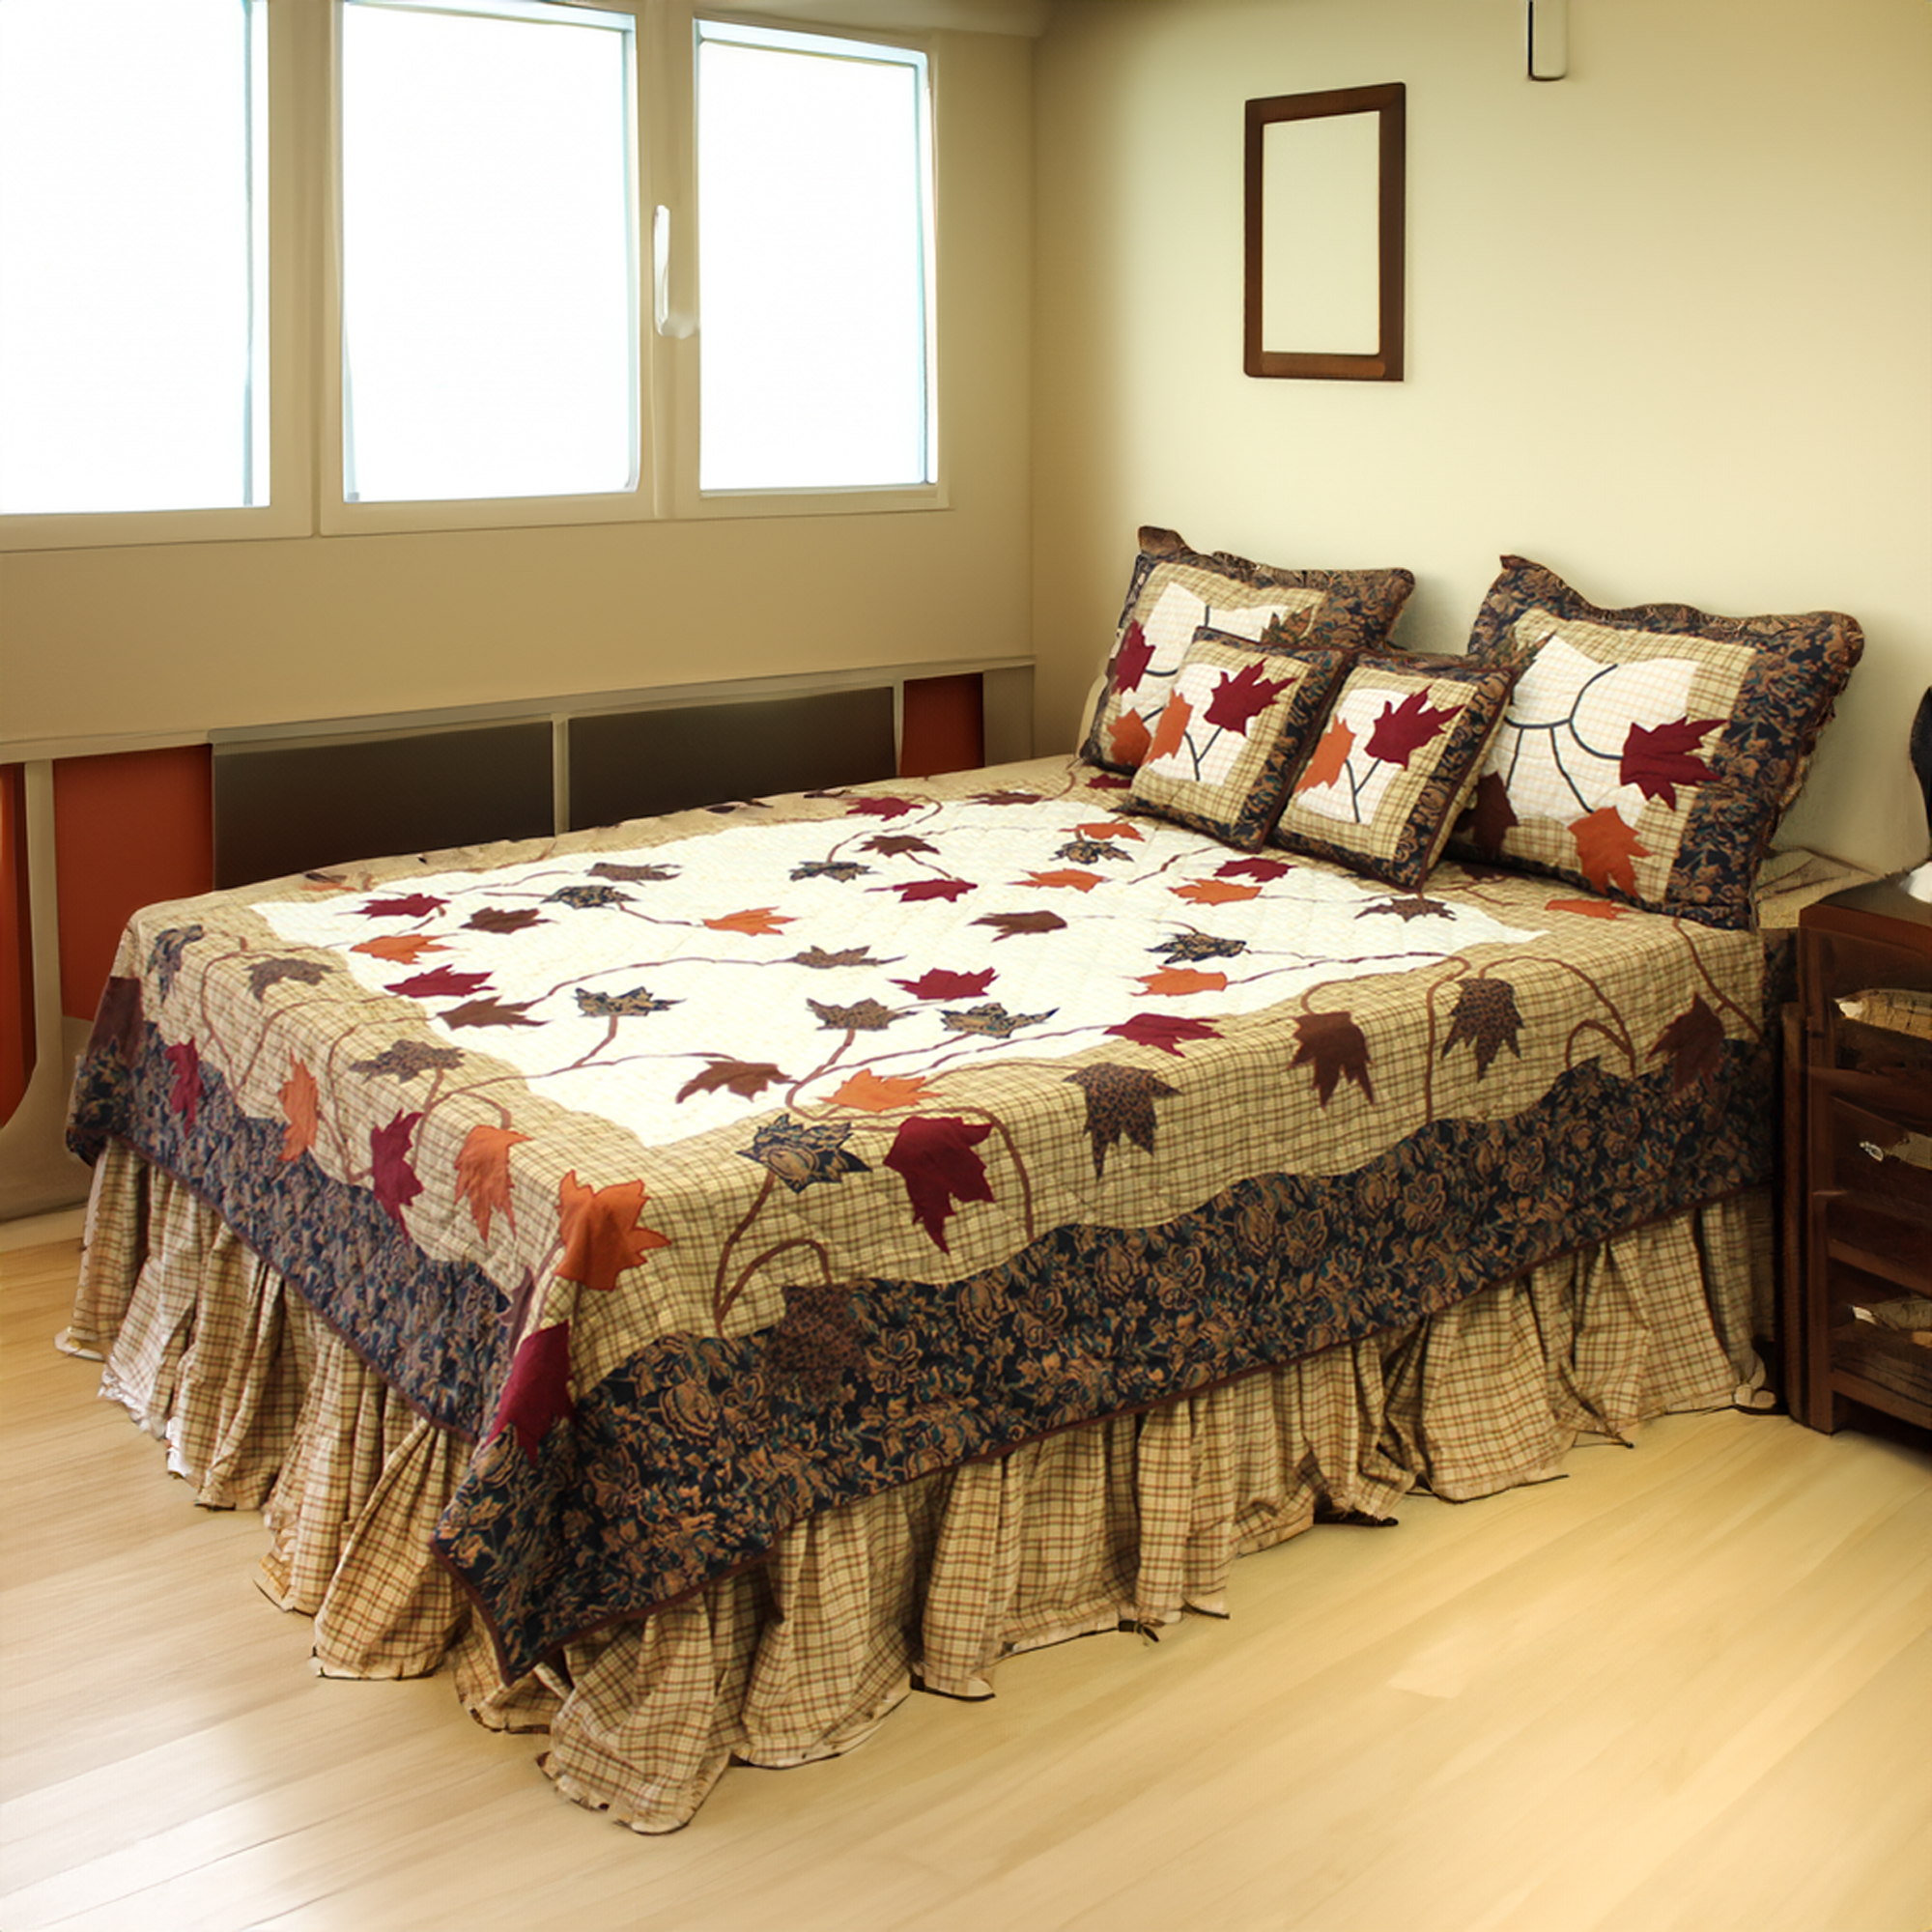 Autumn Leaves Twin Quilt (65"W x 85"L) | Buy a Twin Size Quilt and Get a Matching Pillow Shams FREE!!!